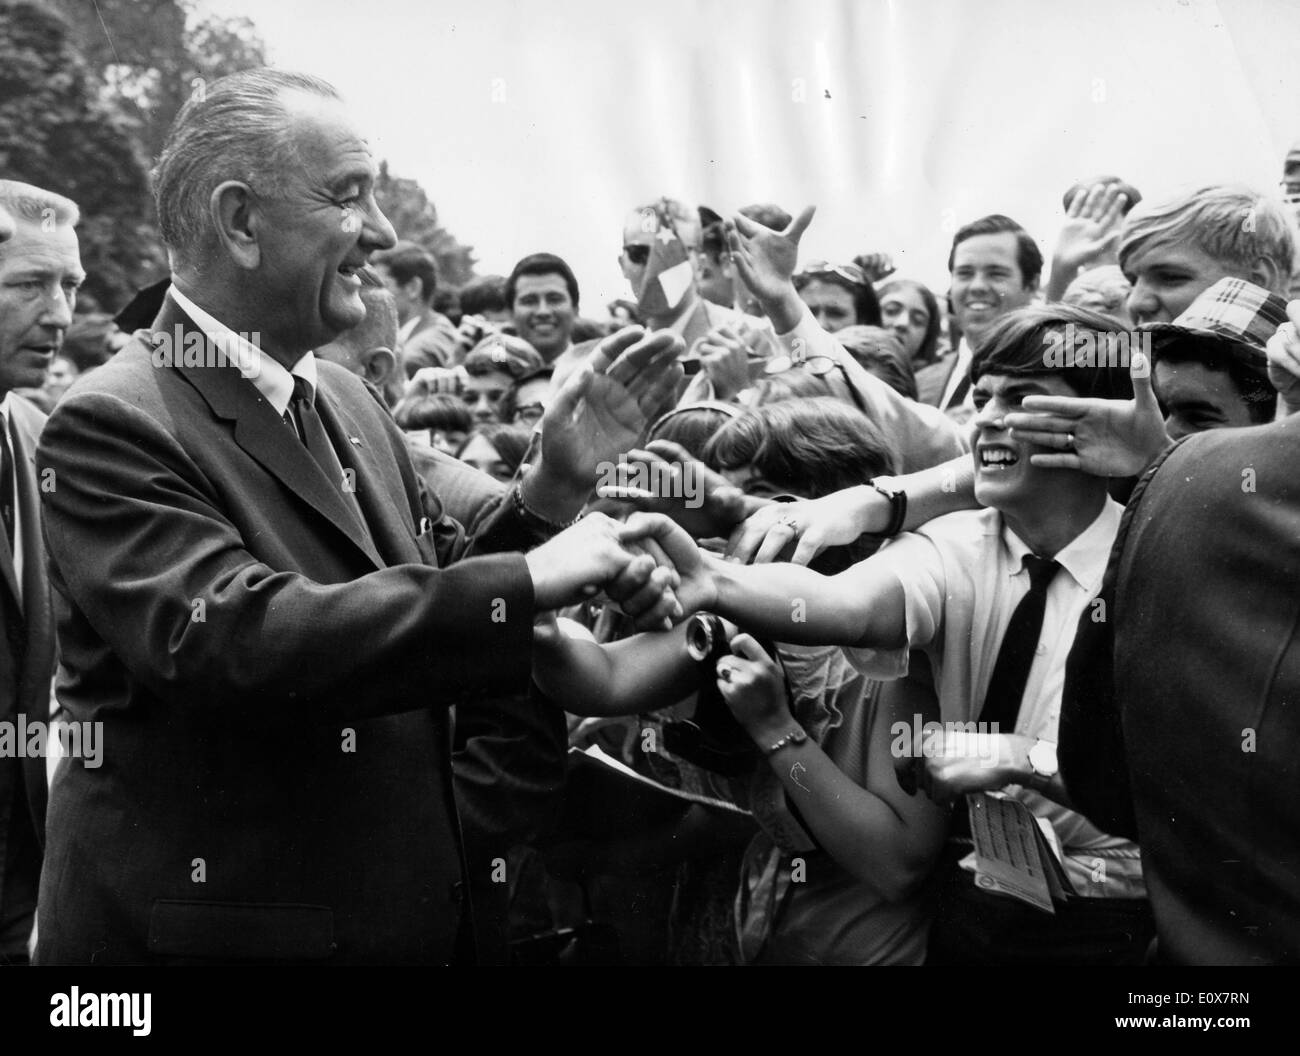 President Johnson shakes hands with students Stock Photo